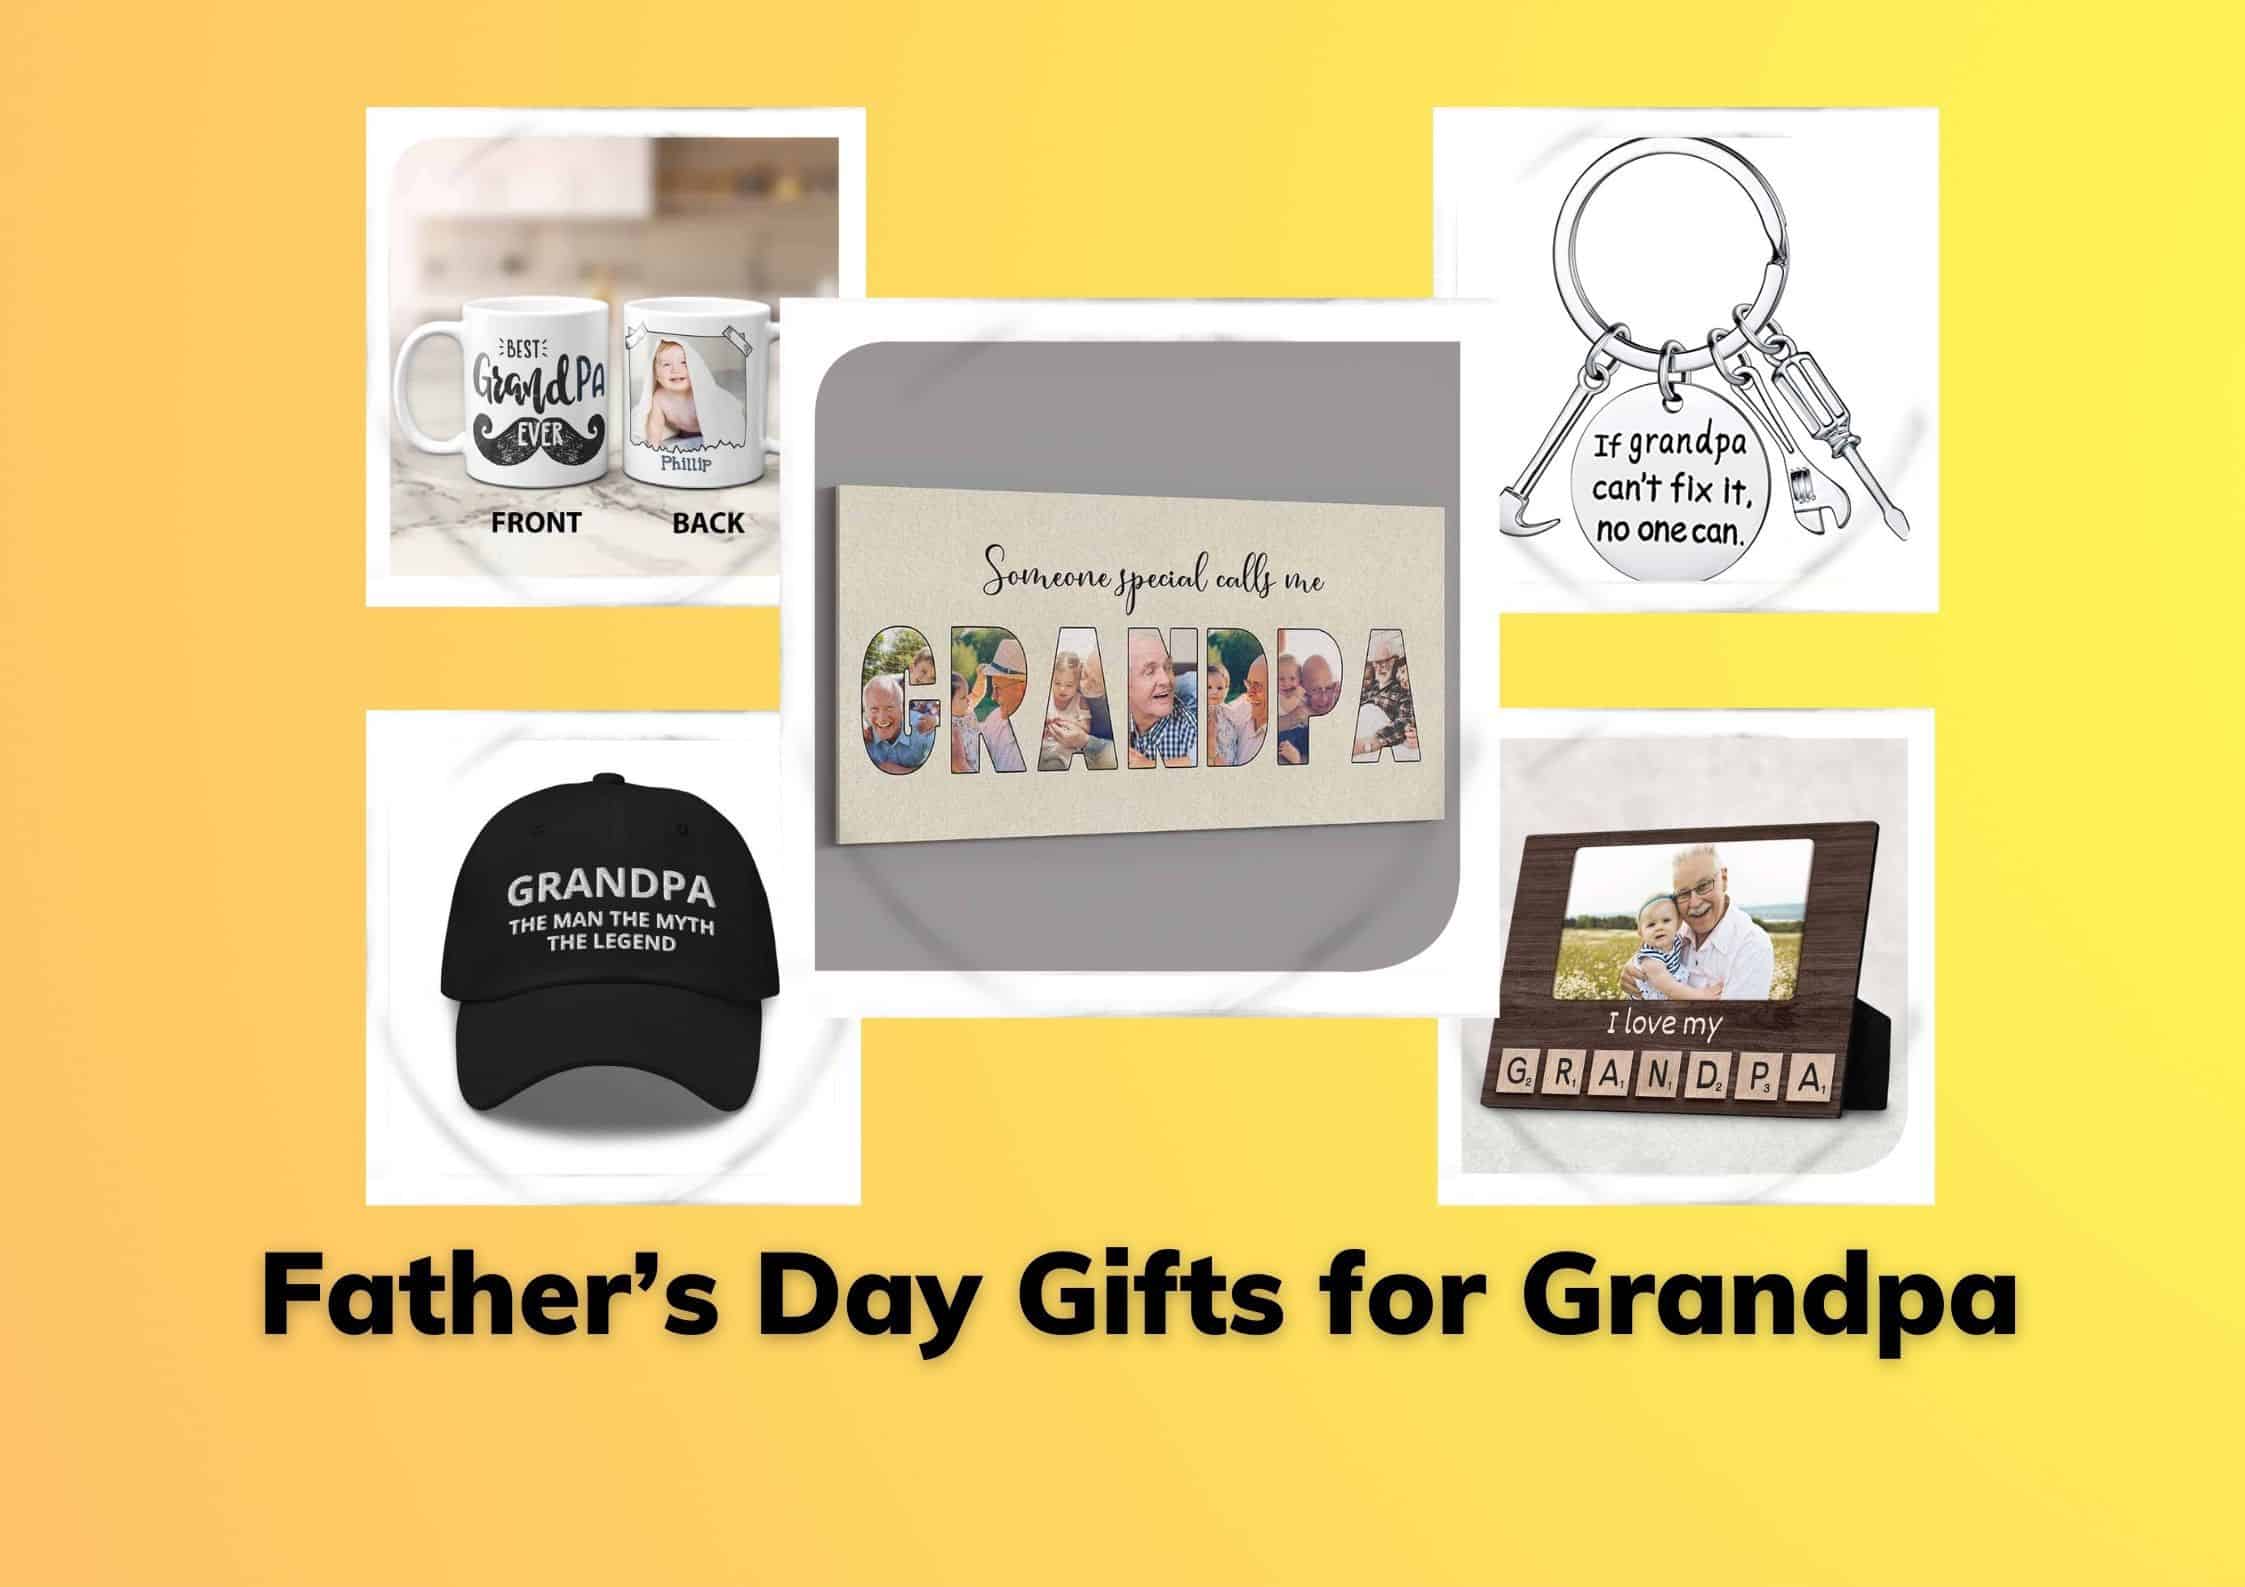 Grand dad Fun Gift A Round Tuit.. Christmas gift Birthday Fathers Day 